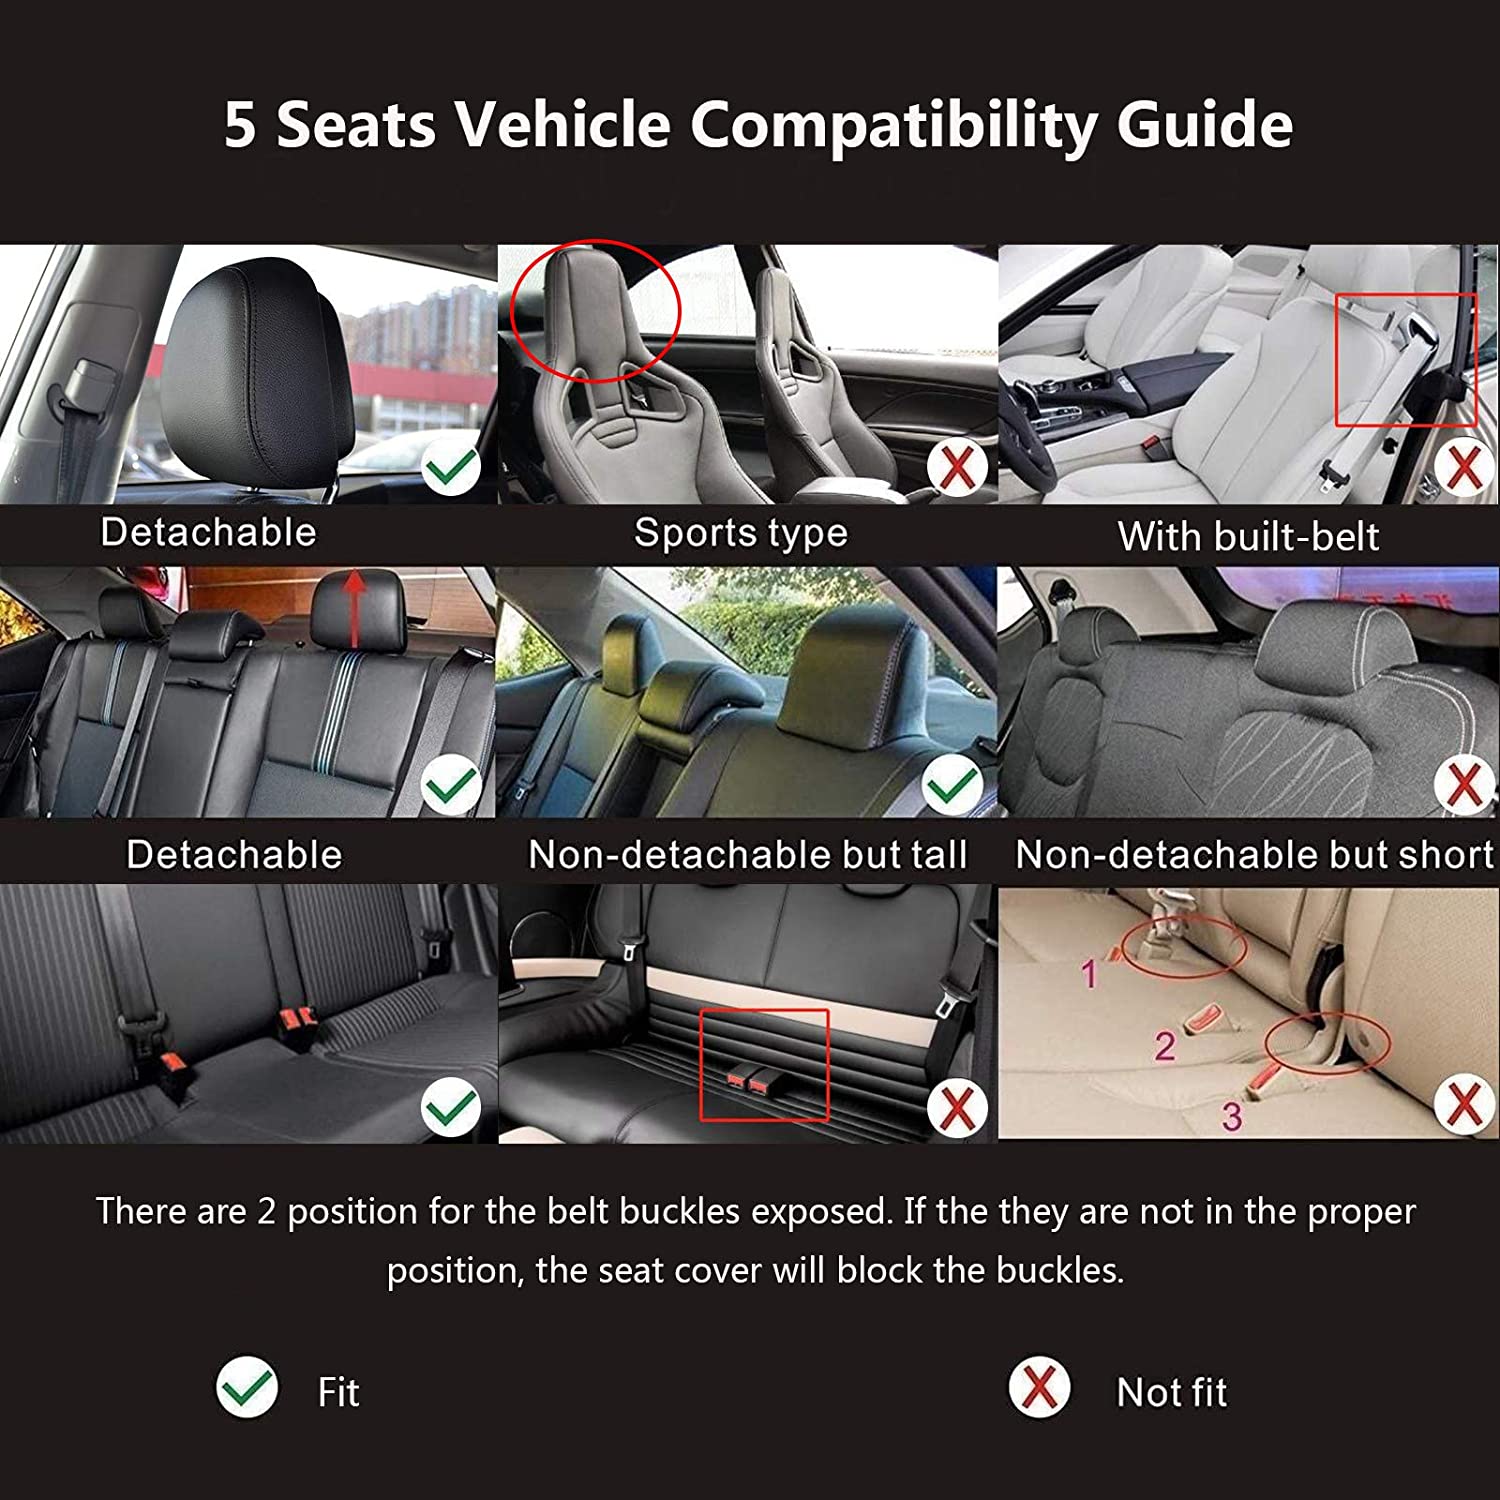 compatibility guide of Universal Car PU Leather Seat Cover